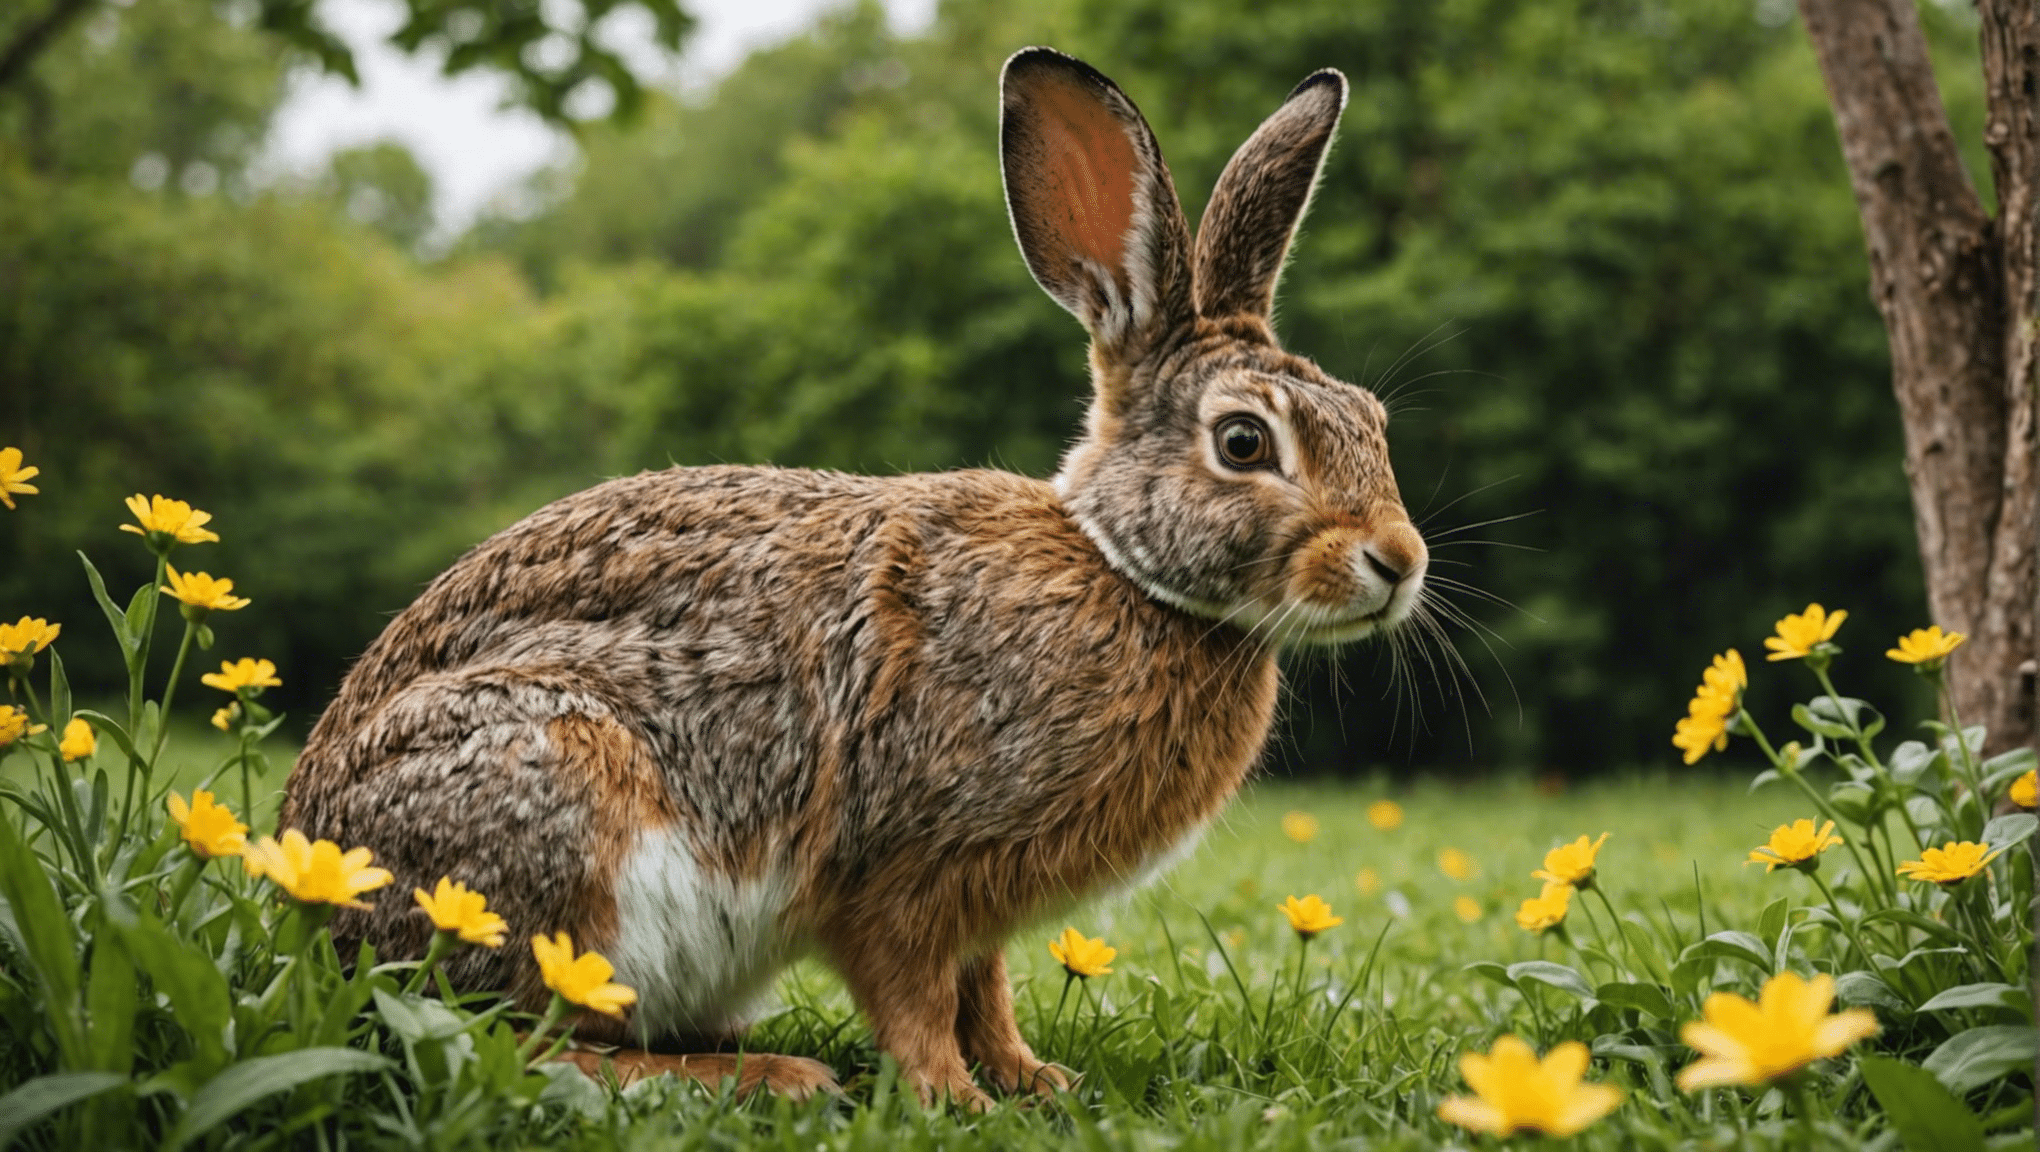 discover the distinctions between a hare and a rabbit in this detailed comparison. learn about their physical characteristics, habitats, and behavioral differences.